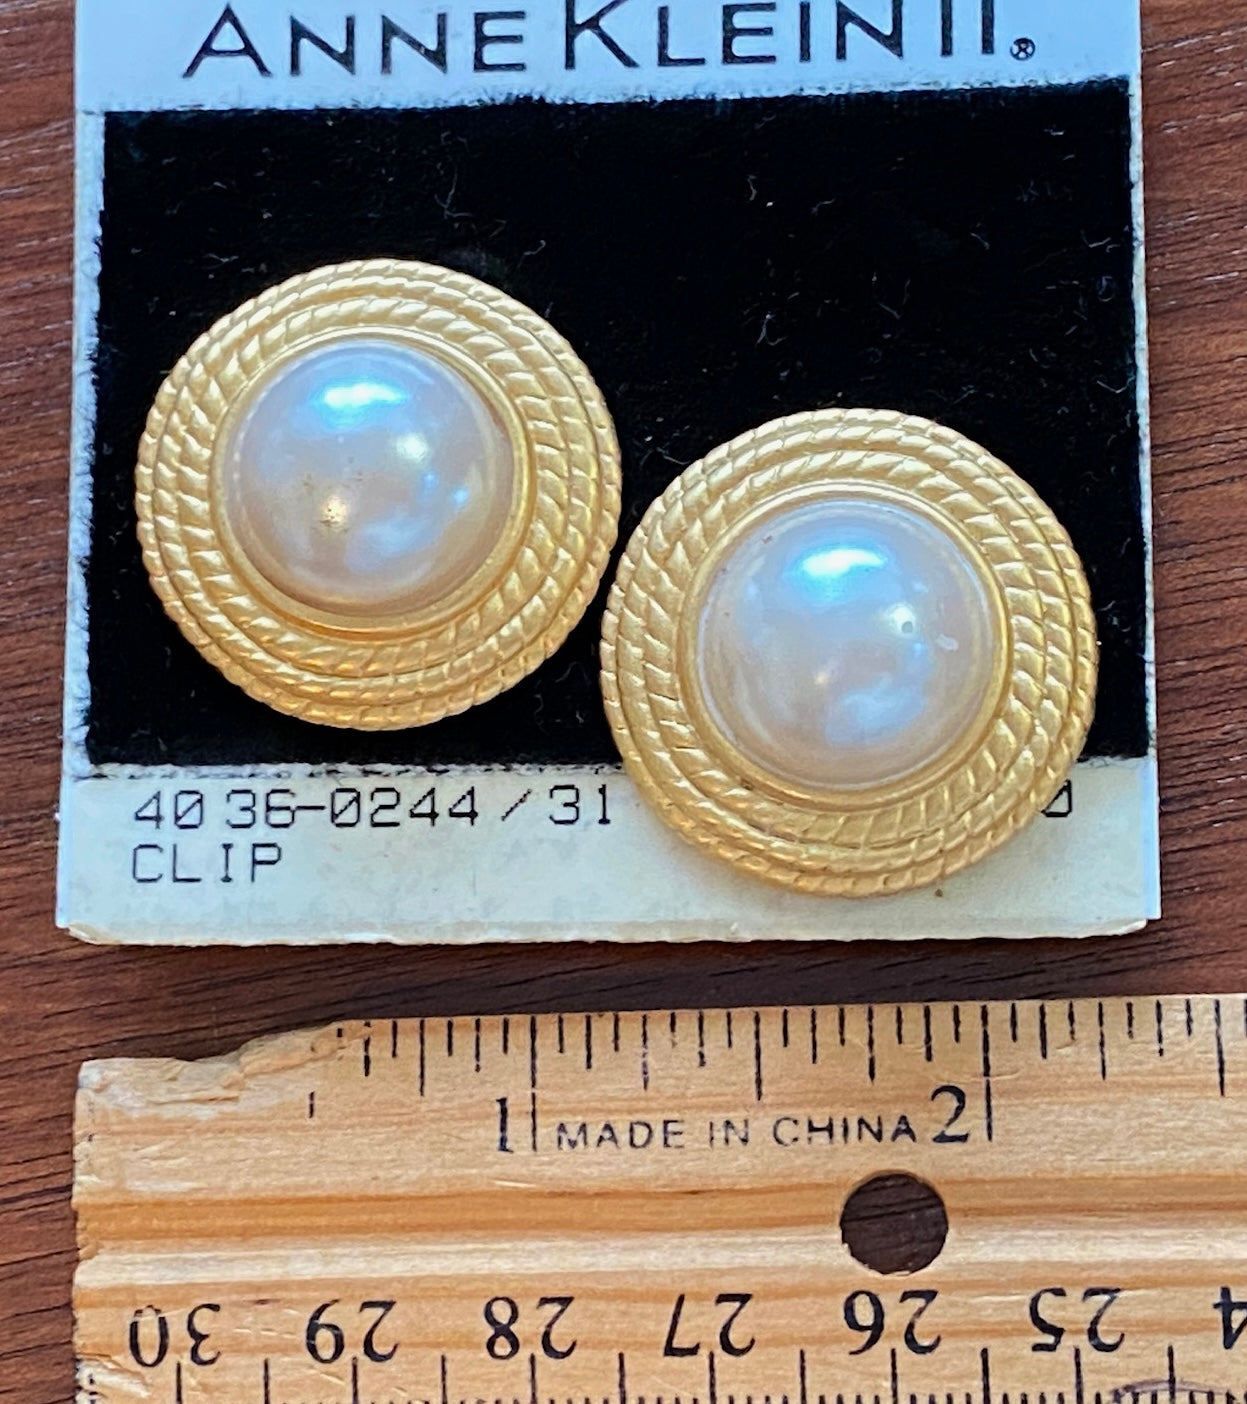 Vintage Anne Klein Gold Rope Faux Pearl Cabochon Clip on Earrings